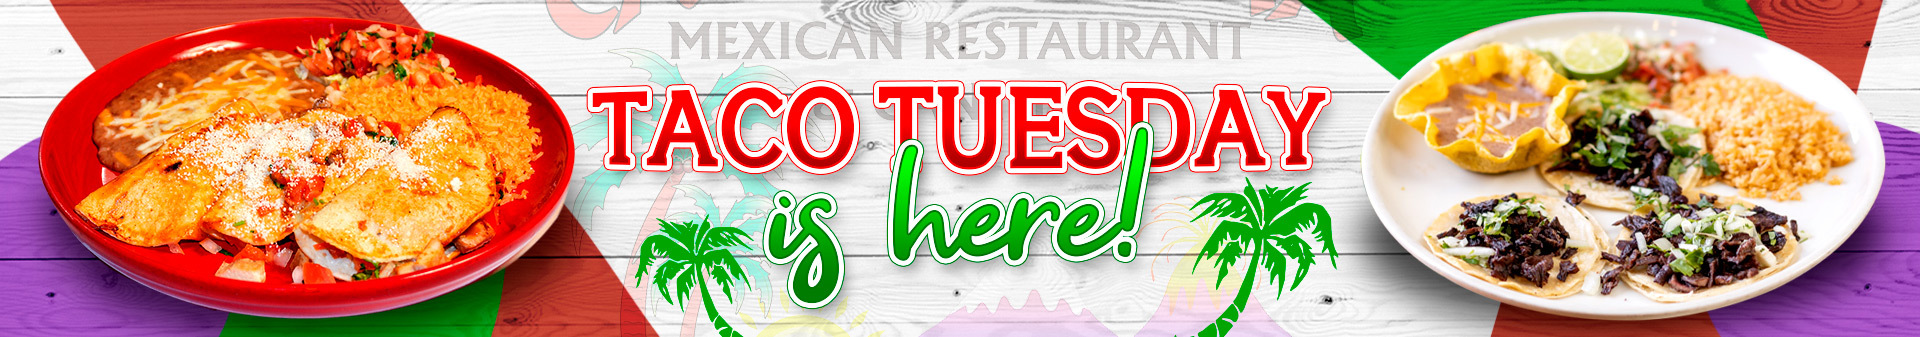 taco tuesday is here casa colima mexican restaurant